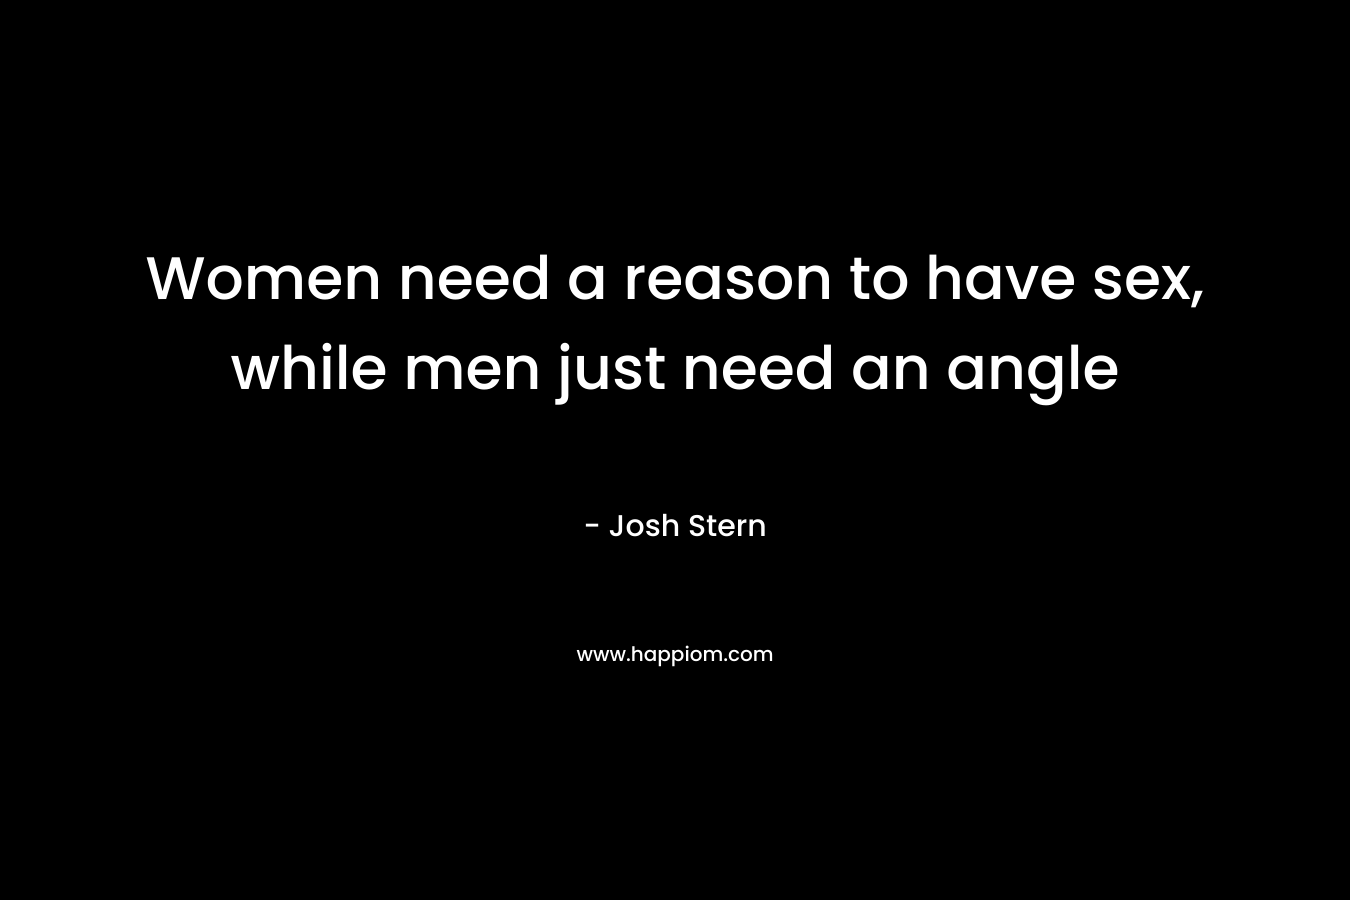 Women need a reason to have sex, while men just need an angle